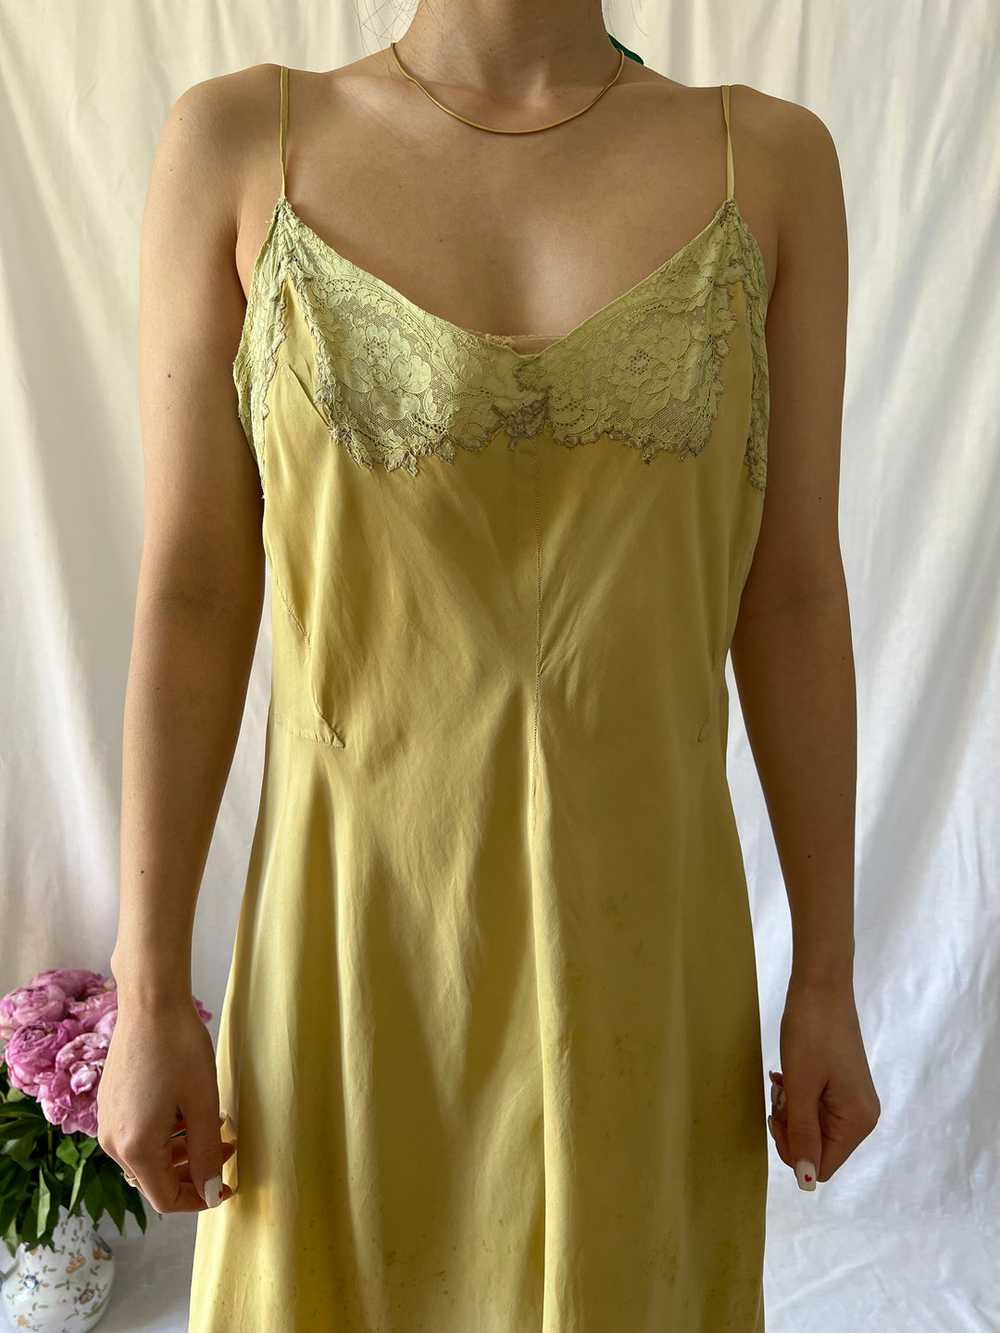 Vintage 40s hand dyed chartreuse green silk slip - image 3